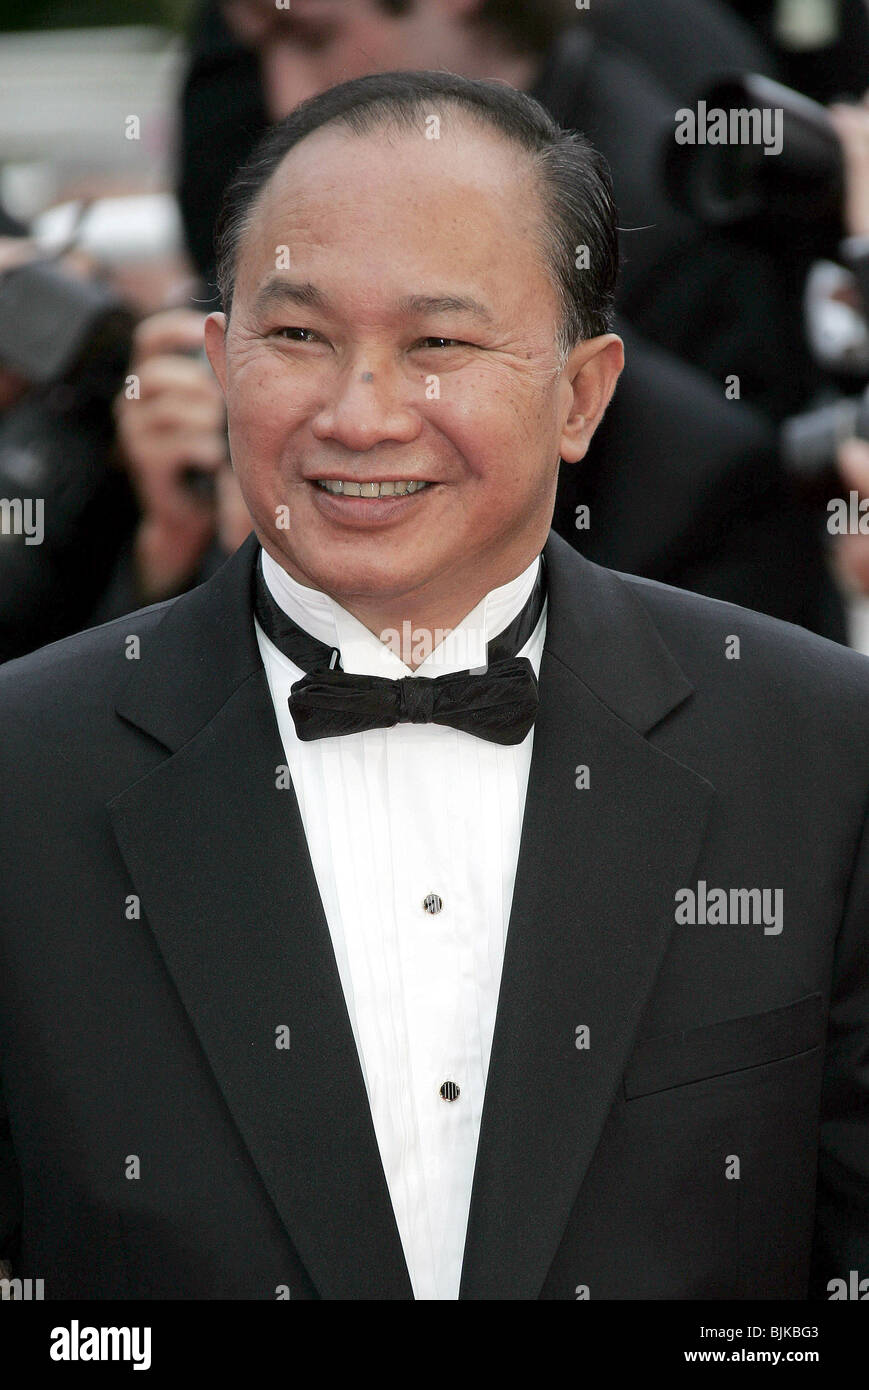 JOHN WOO CANNES FILM FESTIVAL 2005 CANNES FRANCE 12 May 2005 Stock Photo